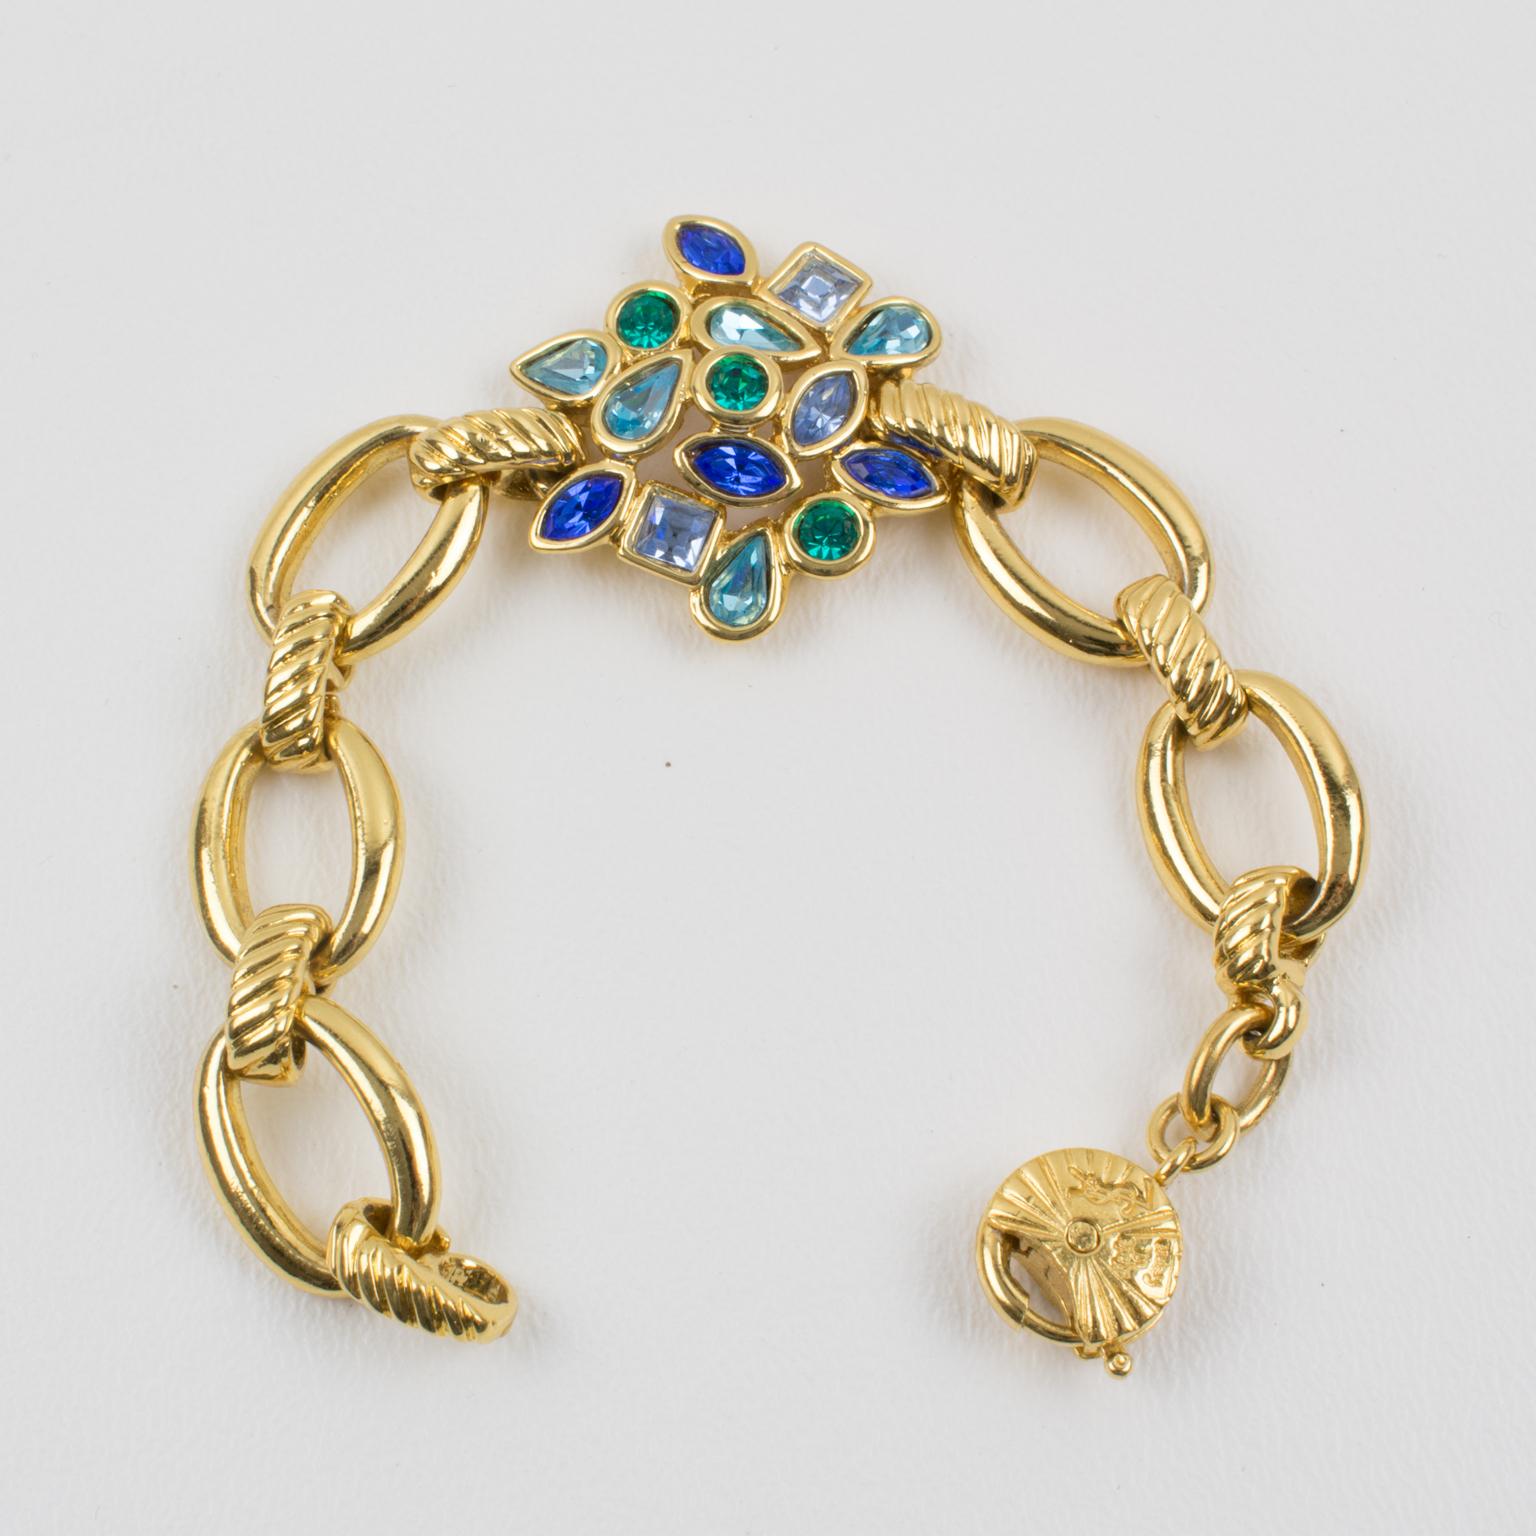 This charming Yves Saint Laurent YSL Paris jeweled gilded metal link bracelet features a gilt worked chain with metal all pierced and textured ornate with one central floral element topped with crystal rhinestones in assorted shapes and colors.